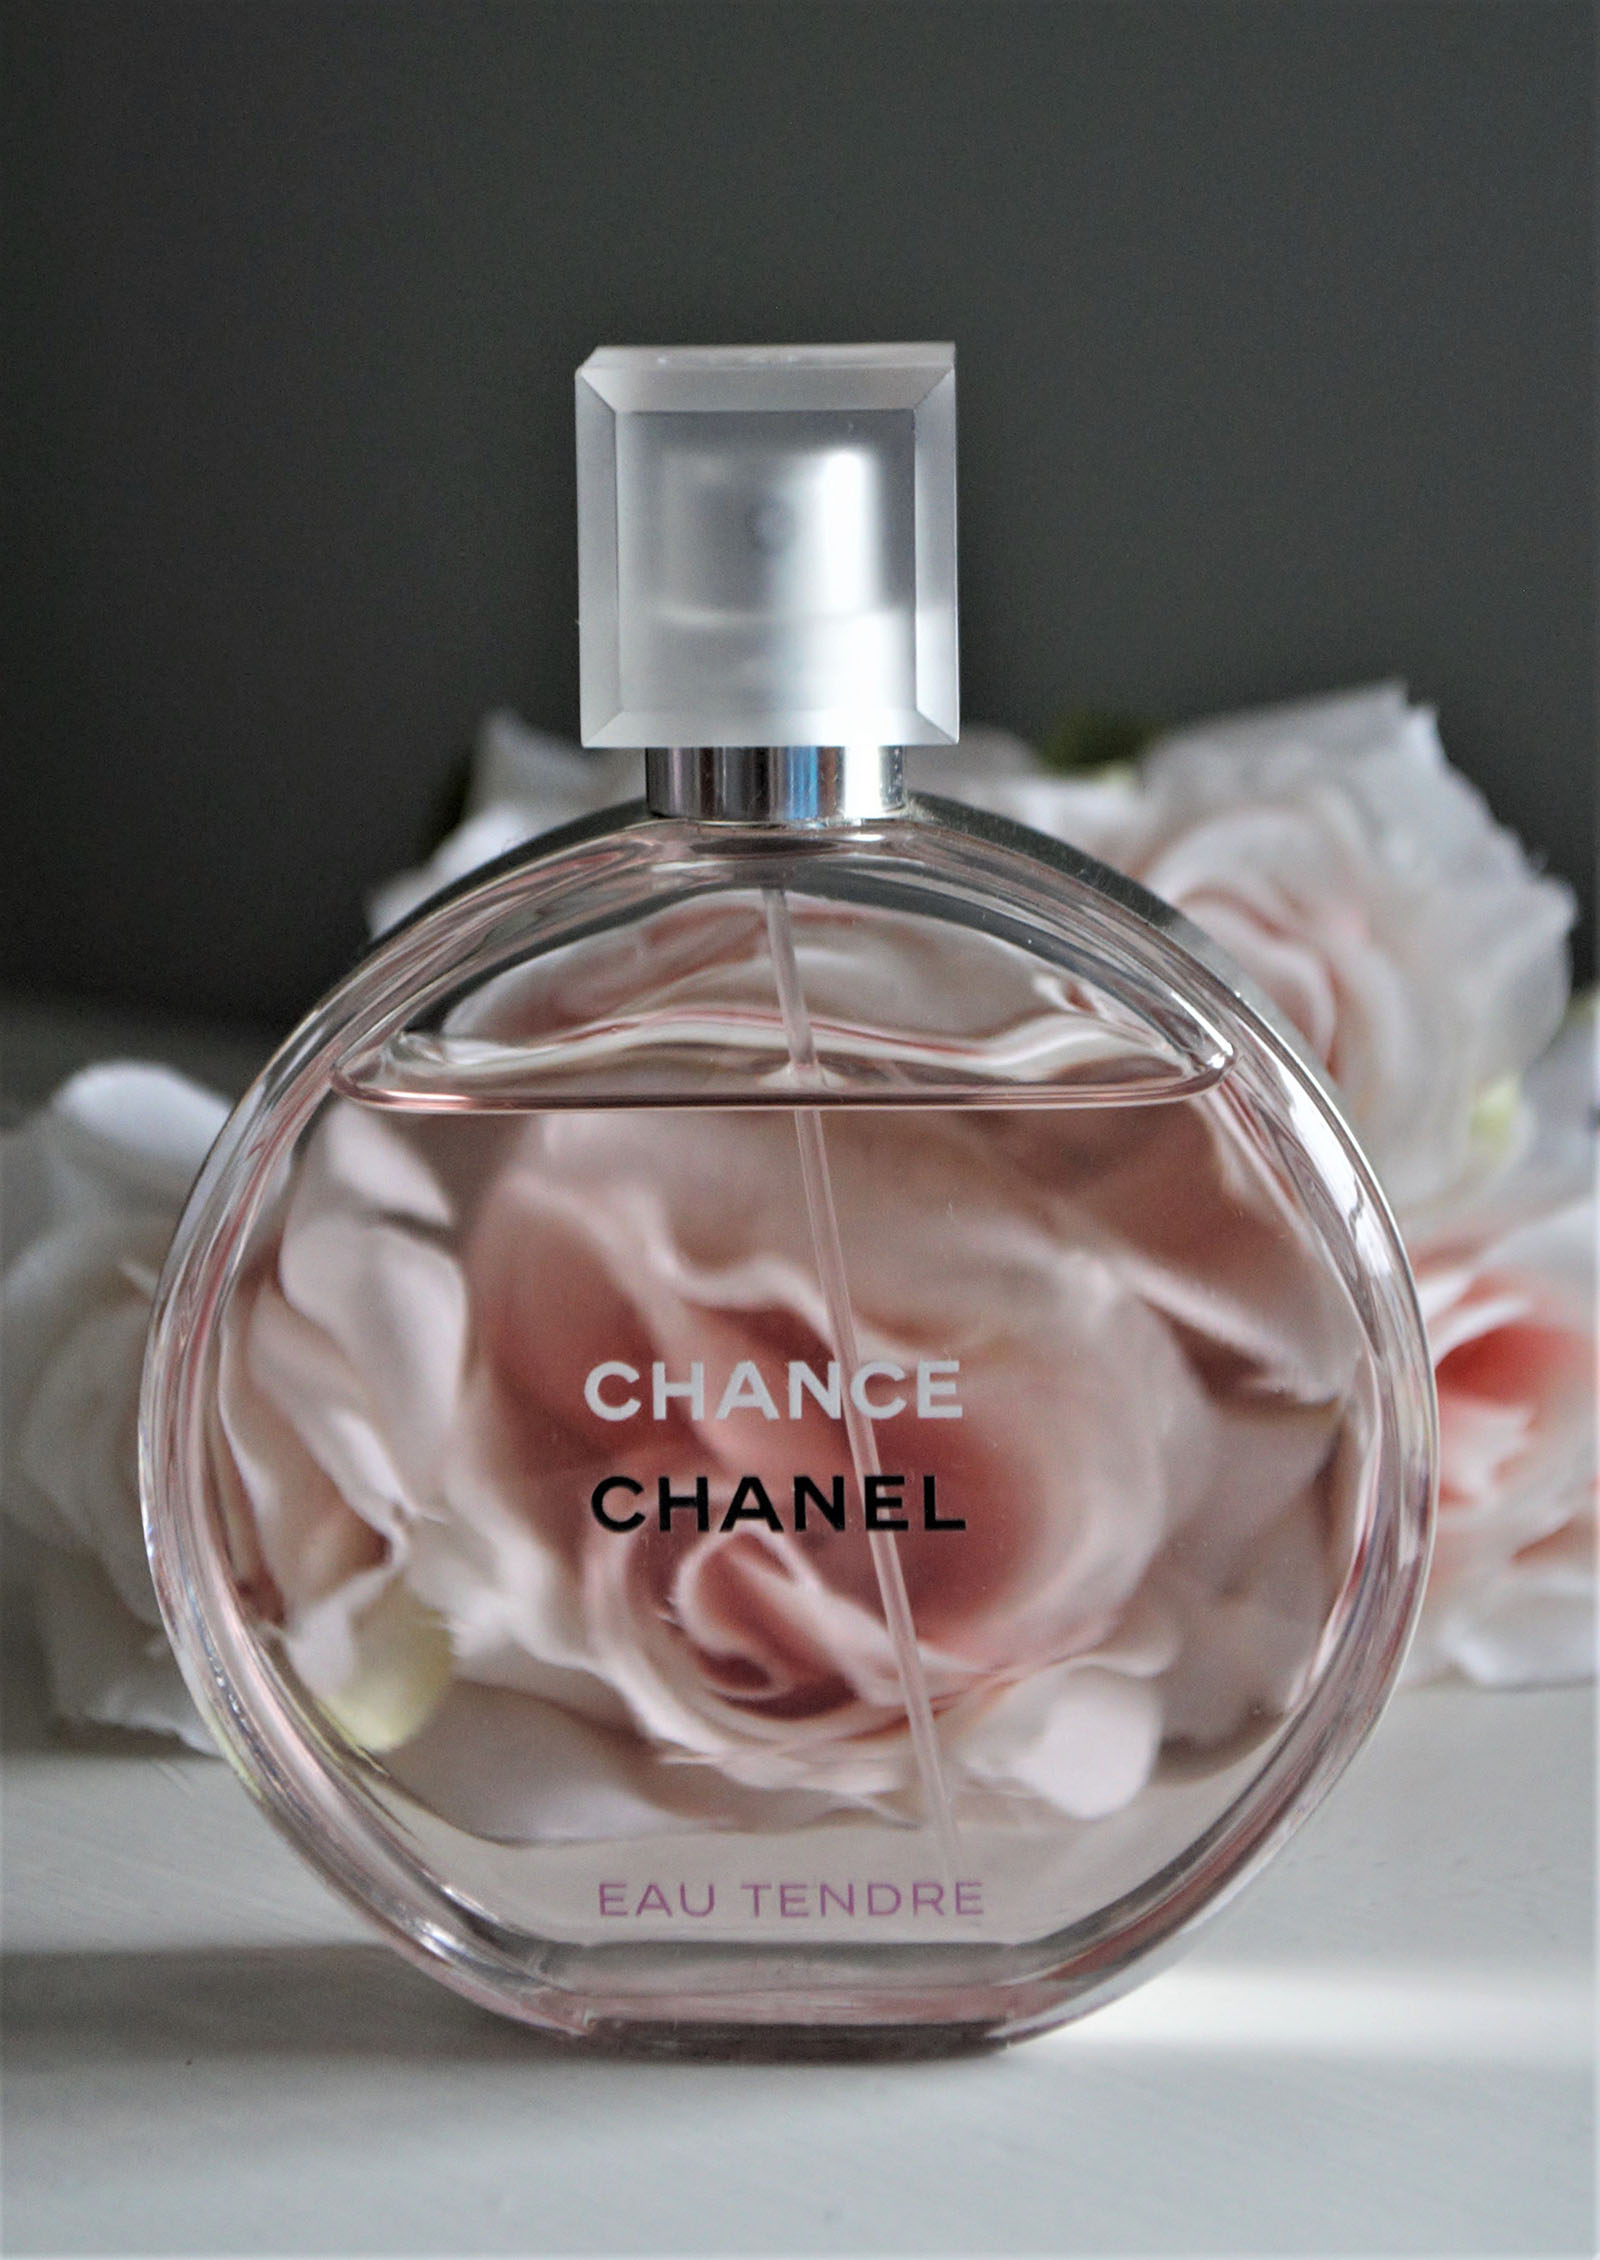 Chanel Chance is a signature scent for Pisces